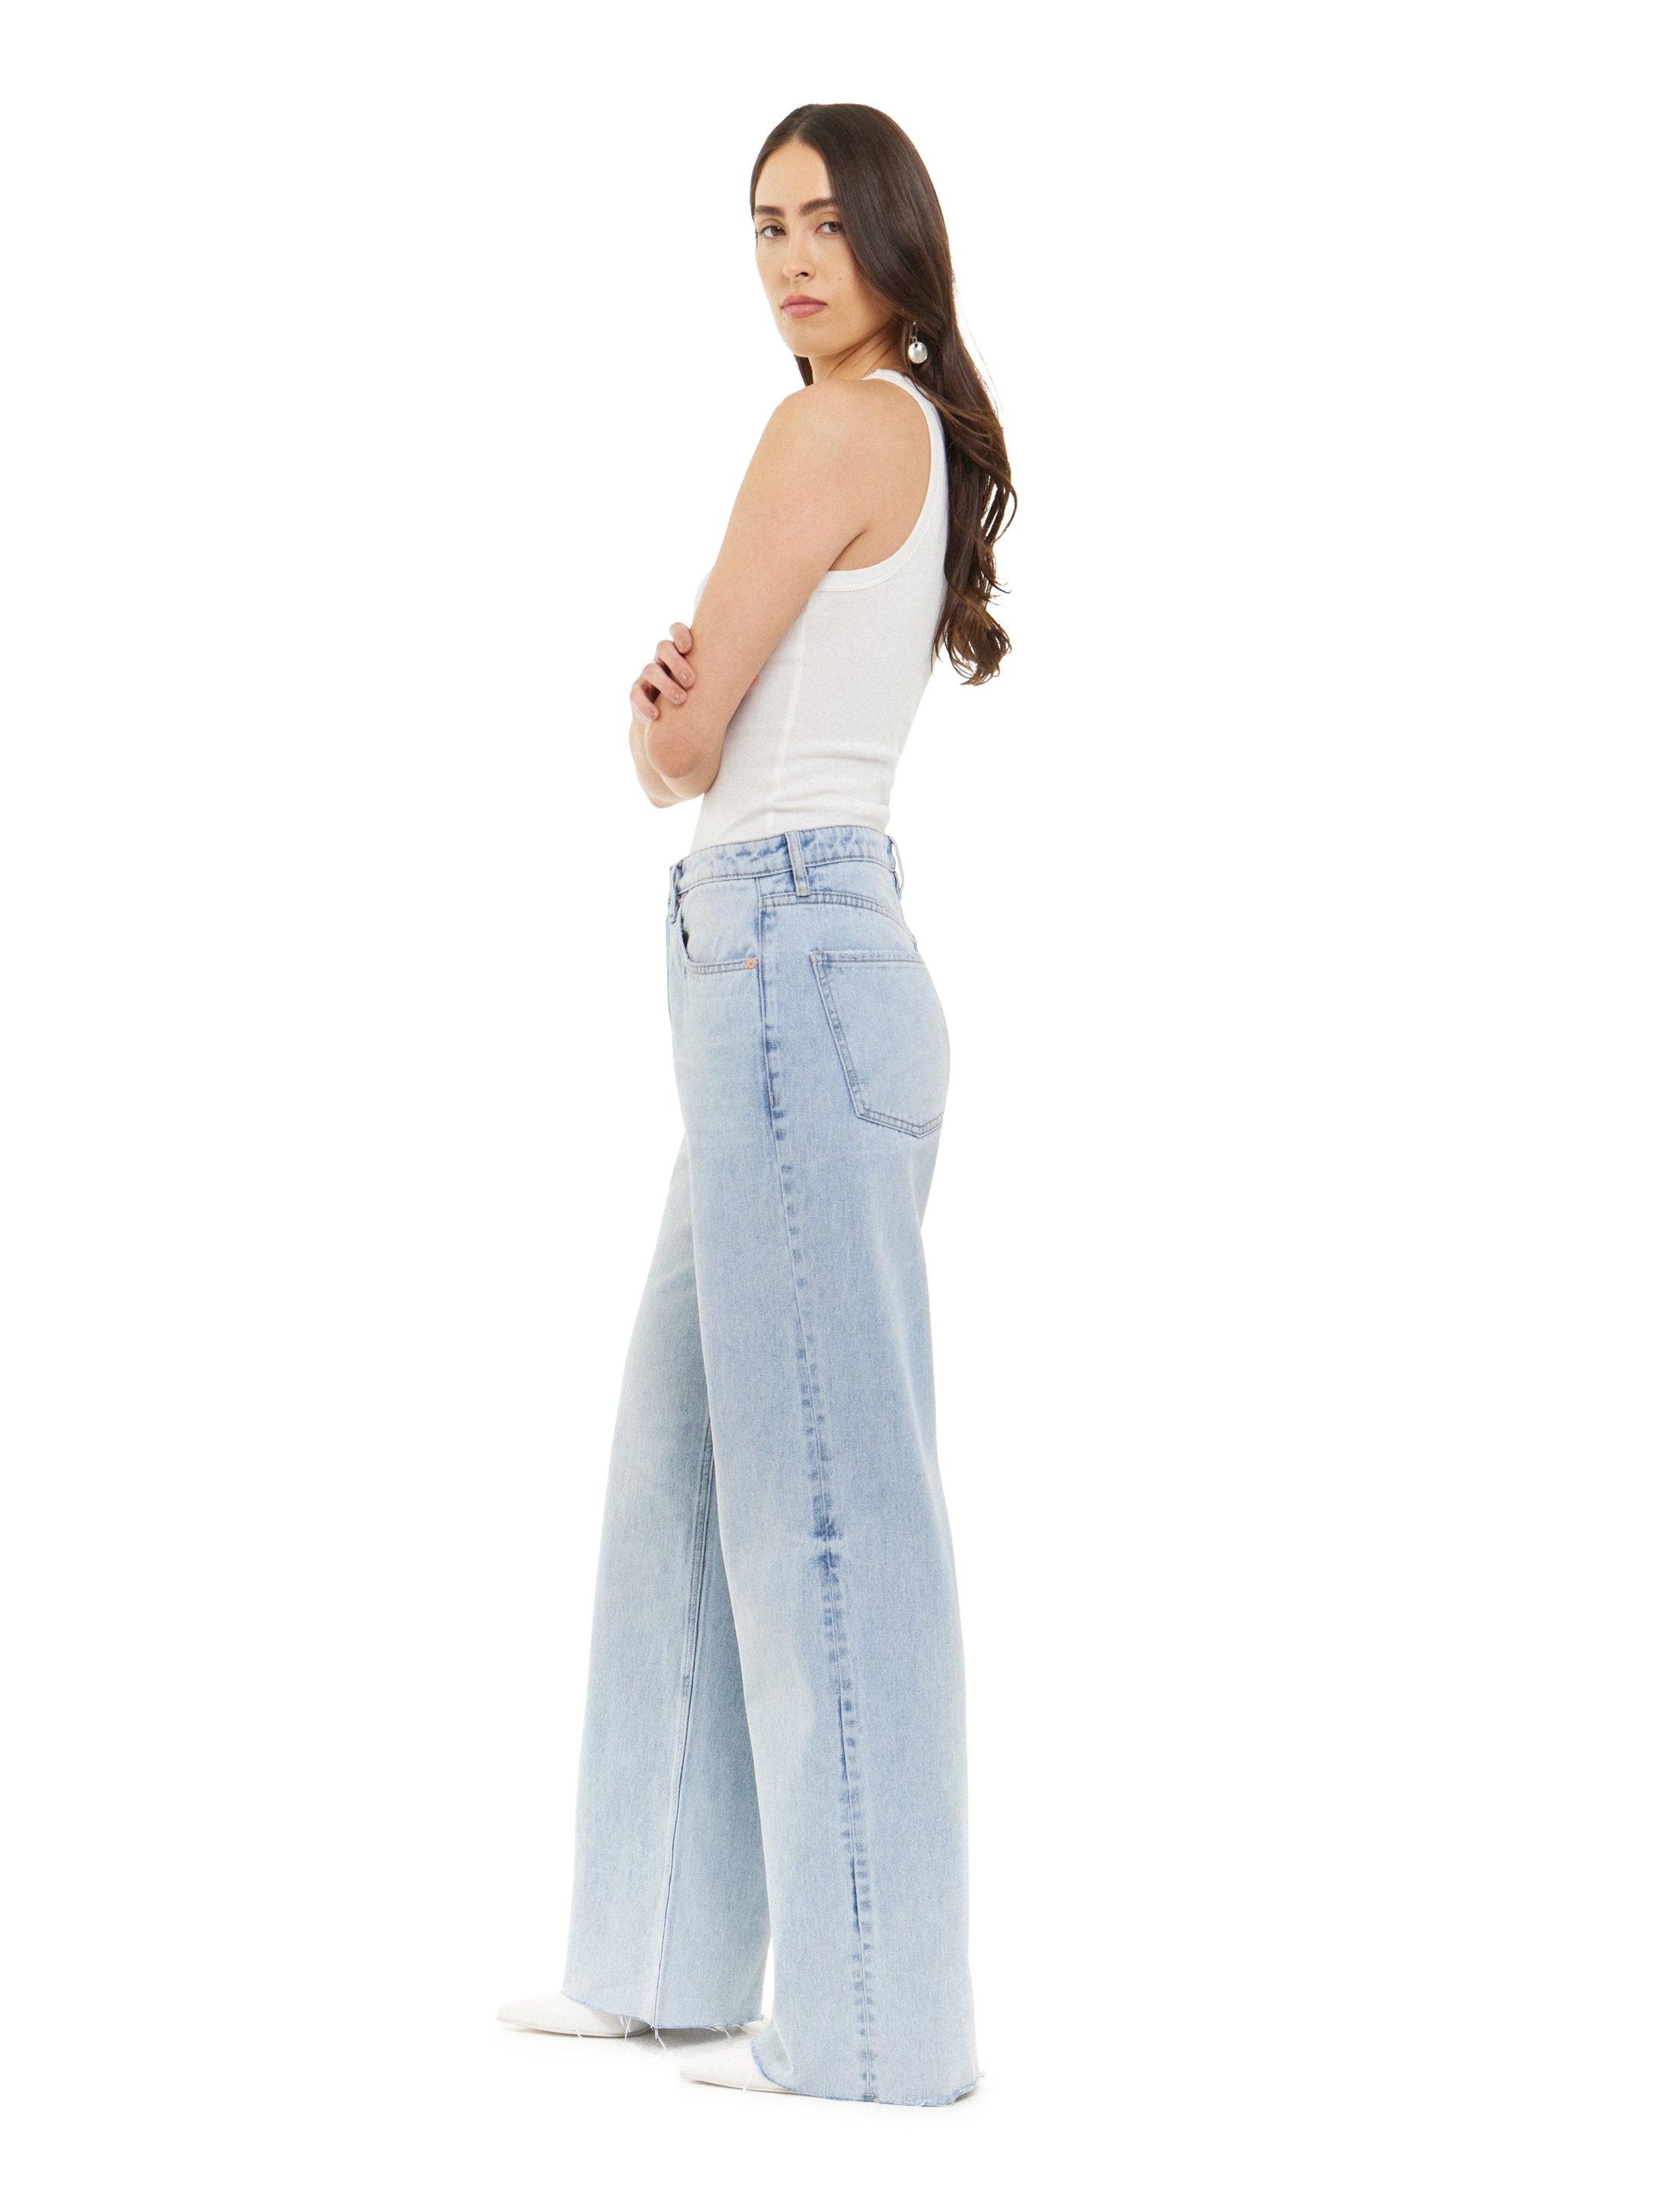 Articles of Society | My New Favorite Boyfriend Jeans